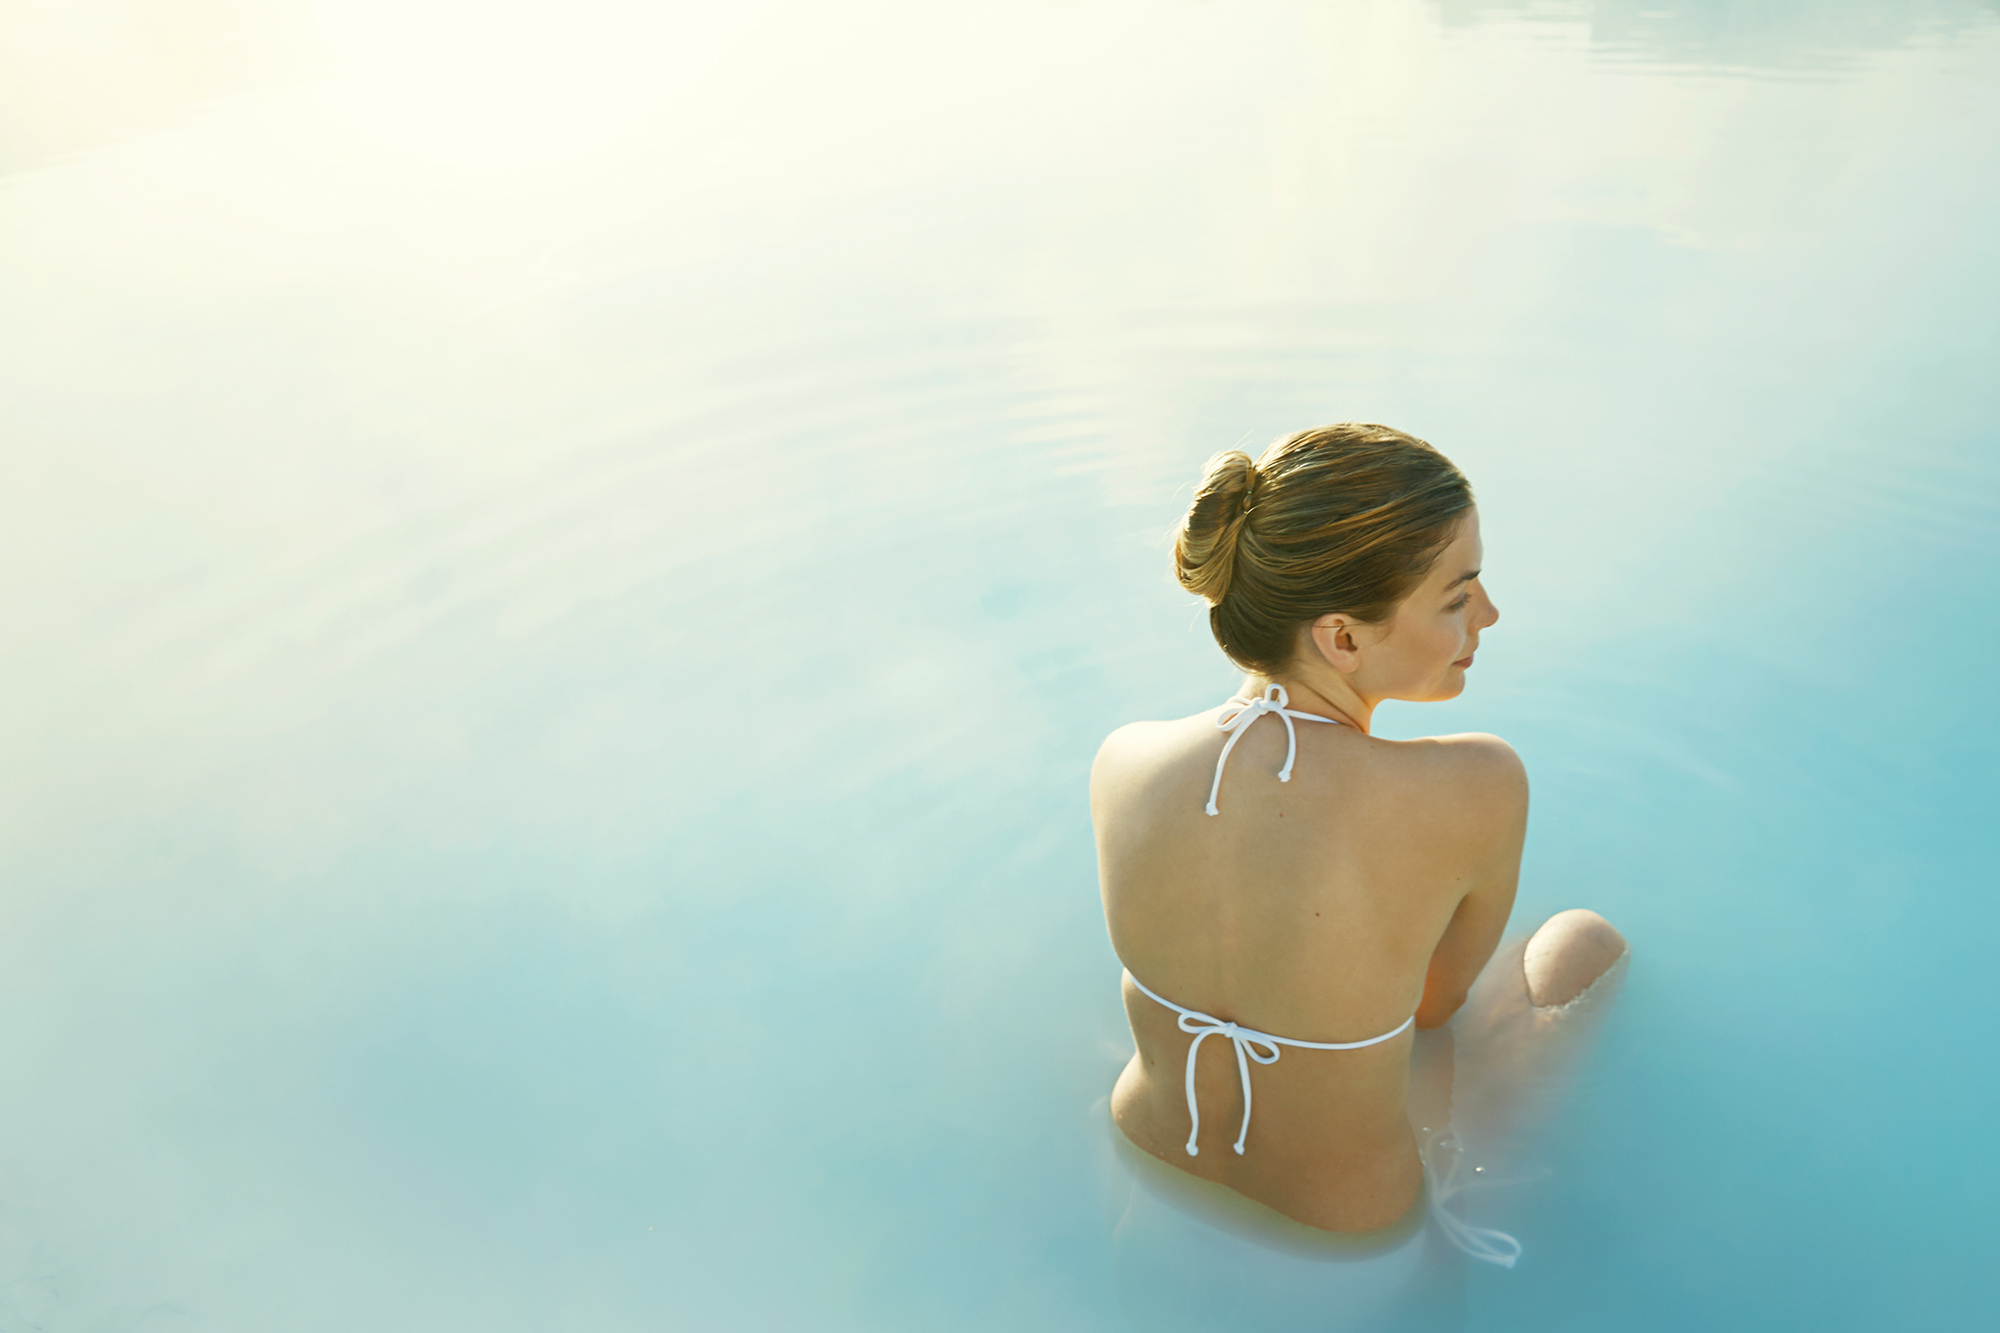 The Blue Lagoon Spa is at the heart of Iceland's volcanic Reykjanes peninsula.